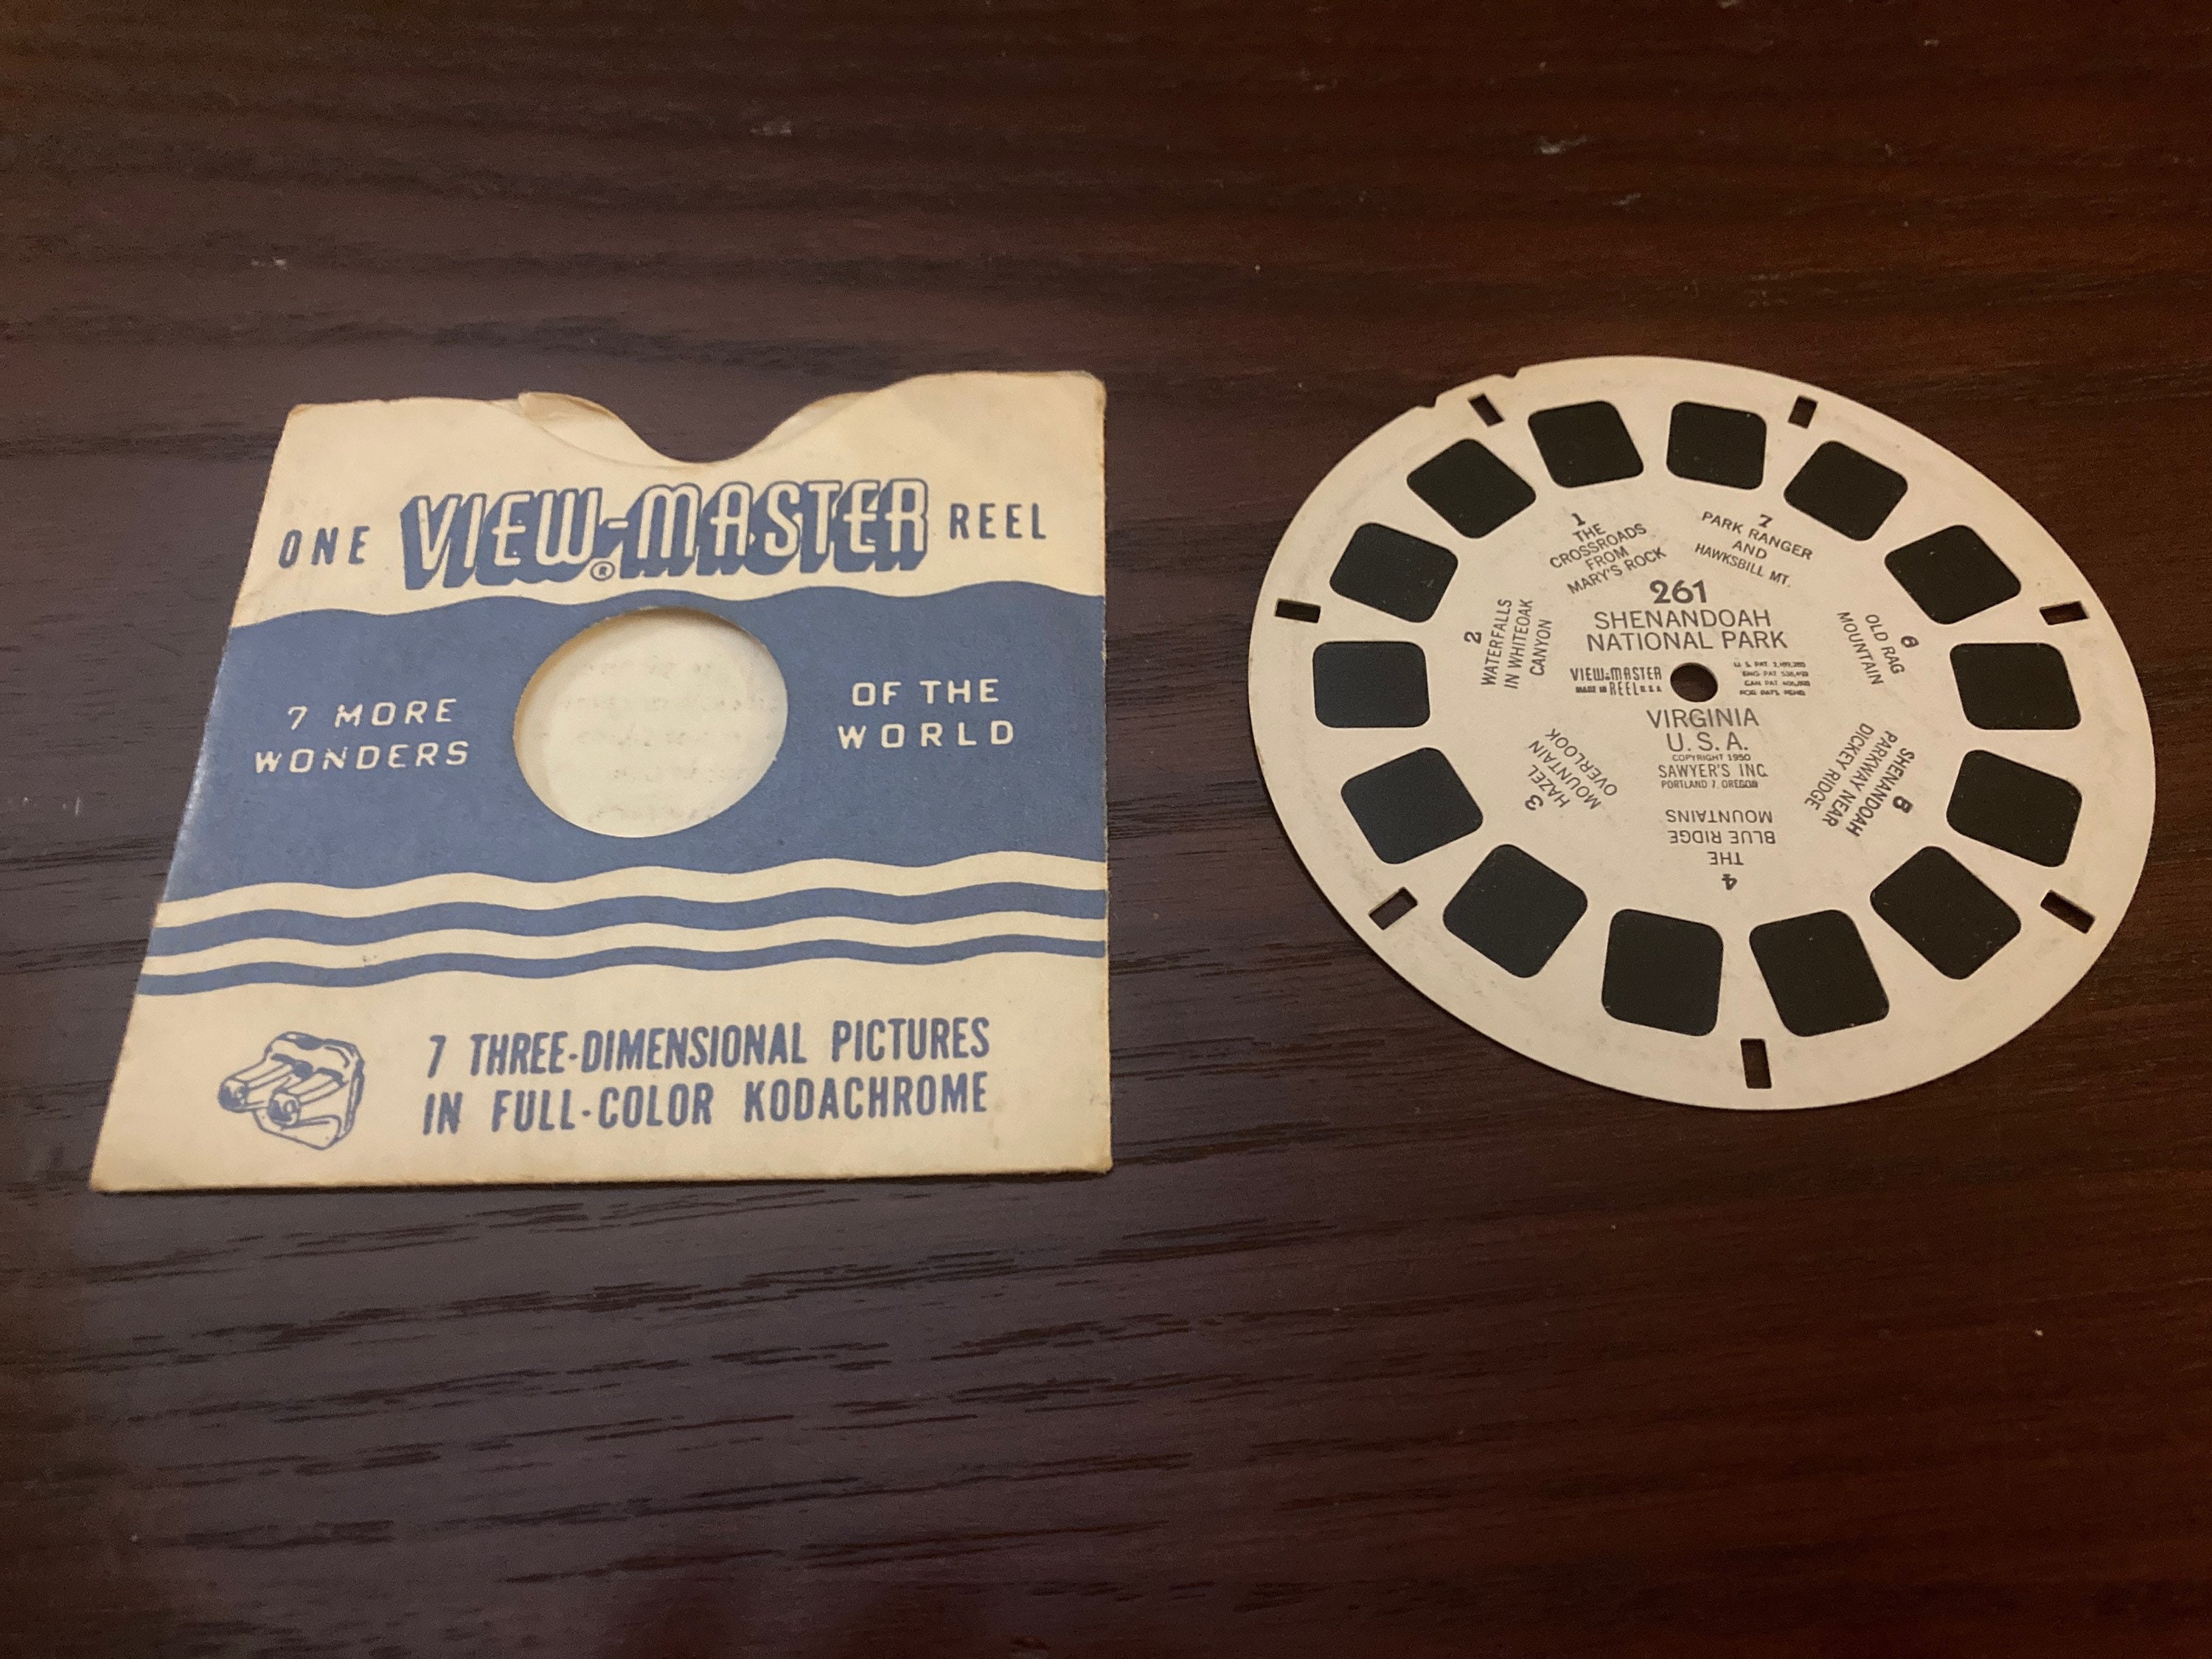 1940's View-master 3-D Story Snow White and the Seven Dwarfs Reel